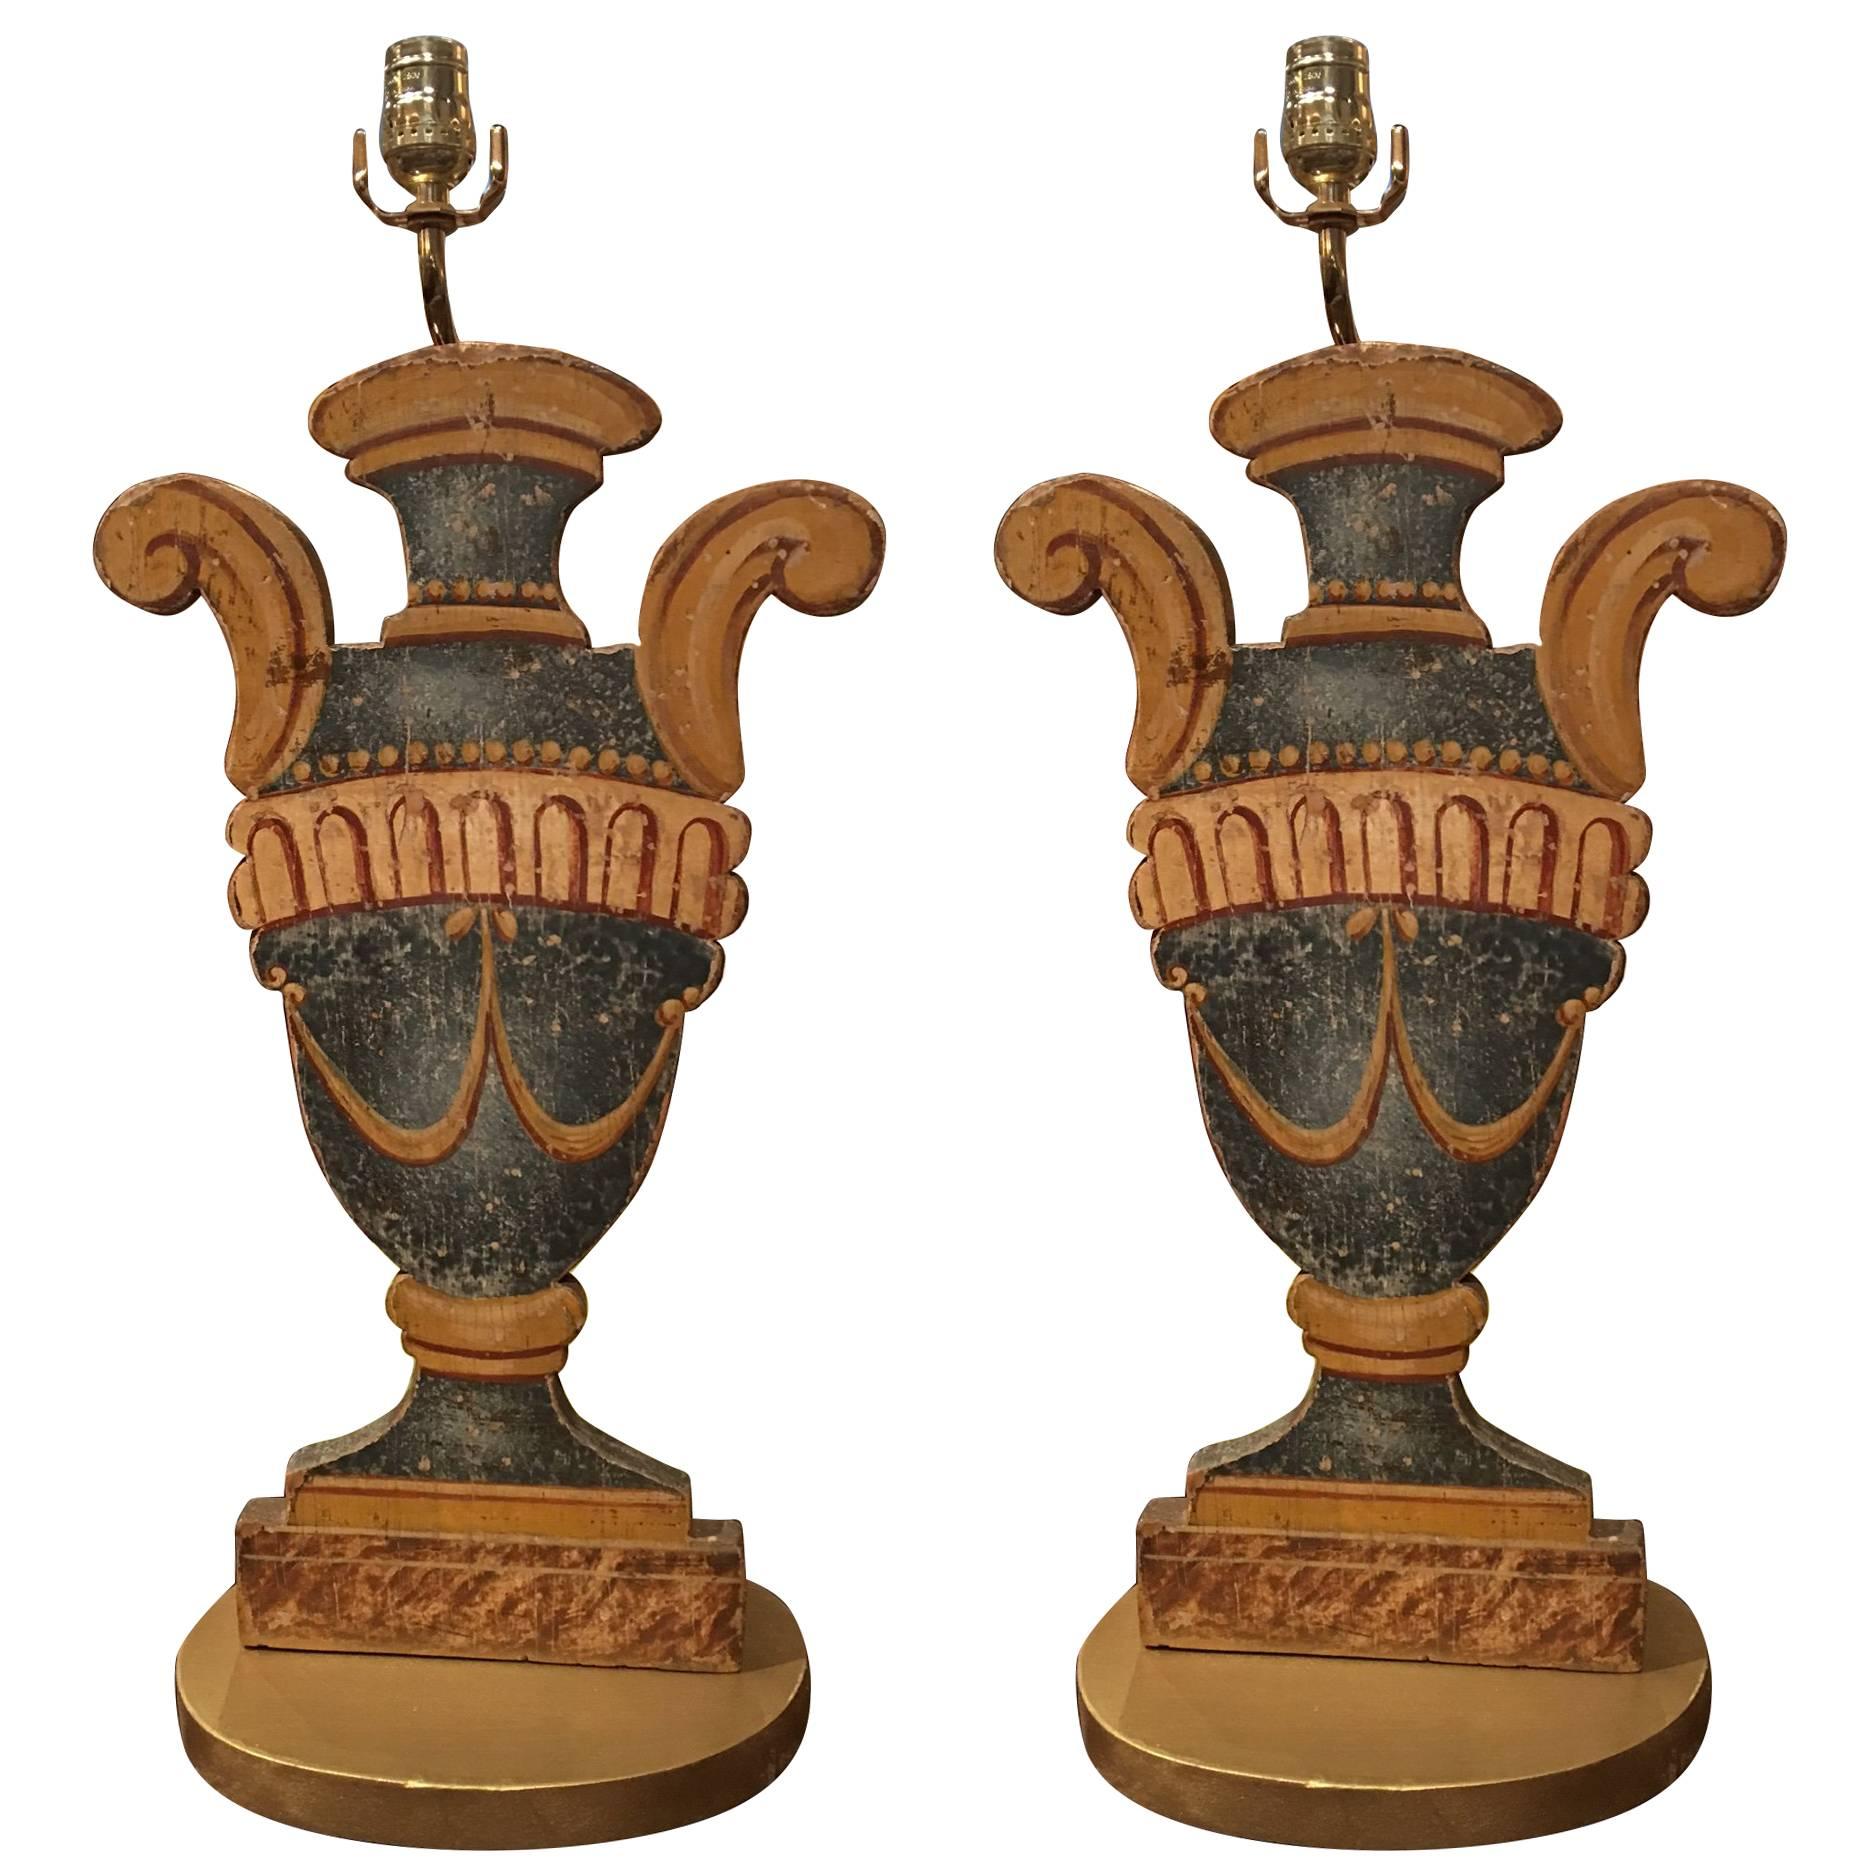 Pair of Italian Painted Urn-Form Plaques Adapted as Lamps, 19th Century